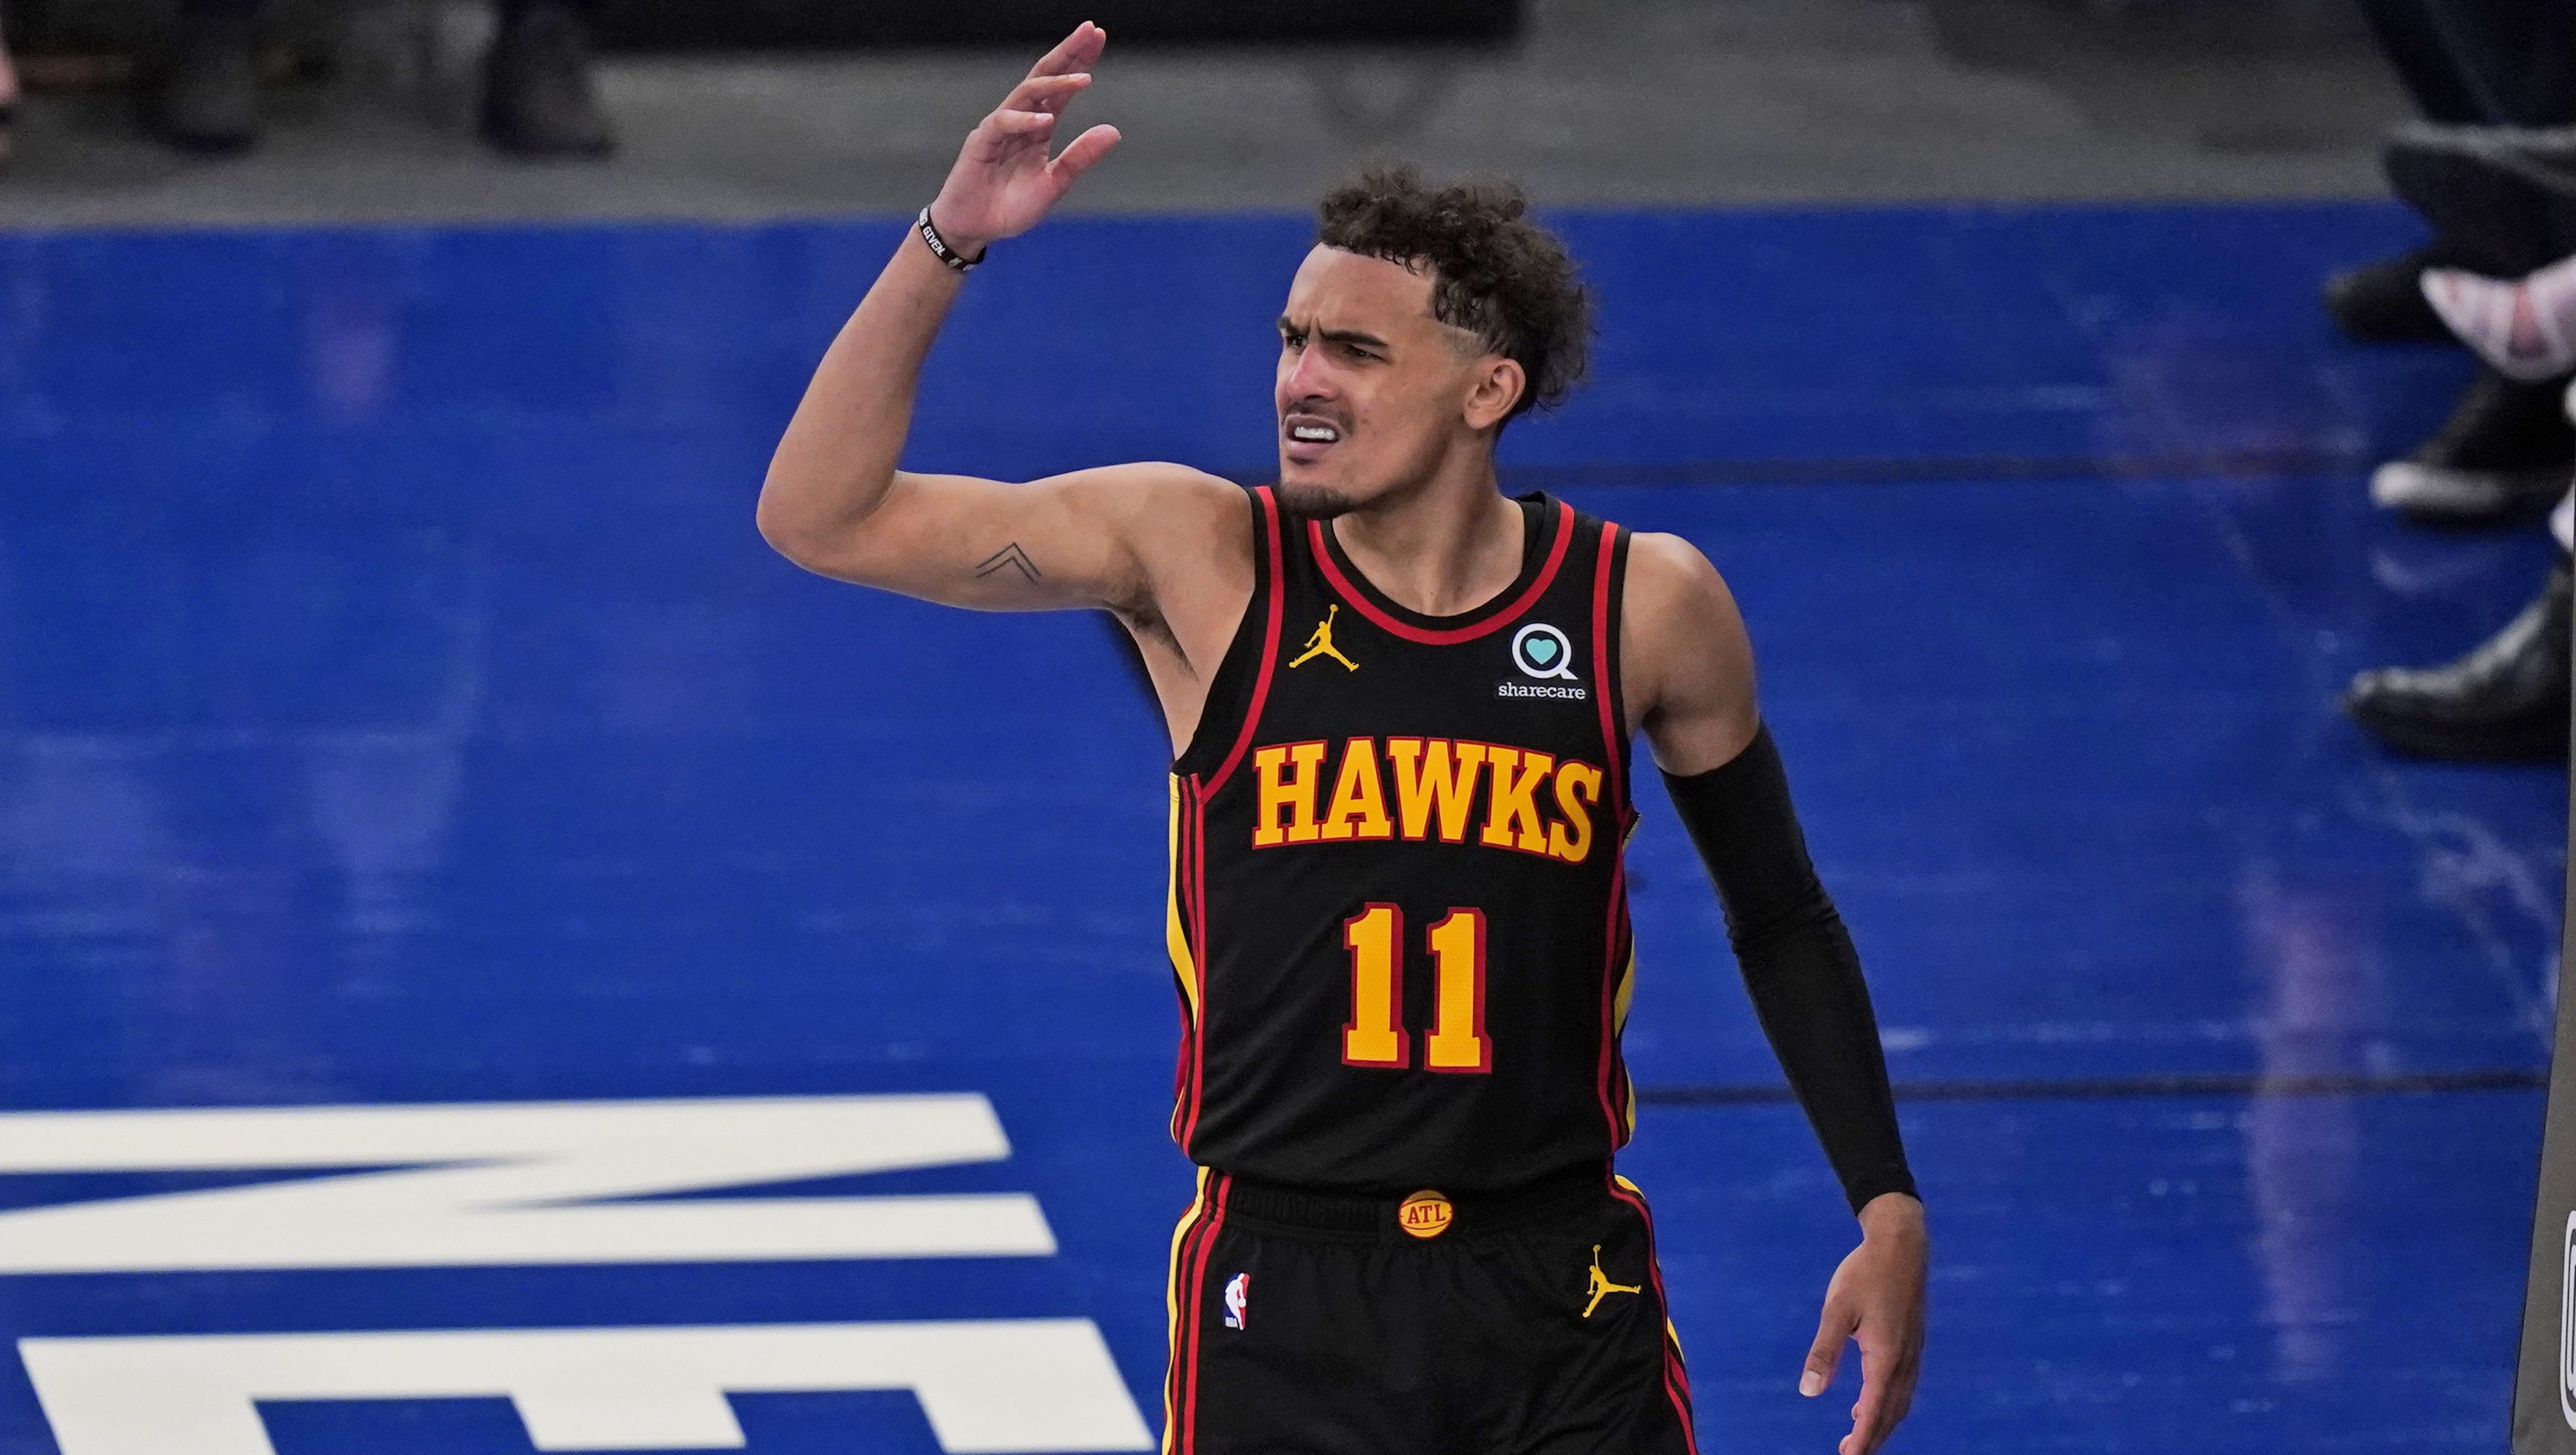 NBA Playoffs: Trae Young quickly rose to villain for Knicks fans